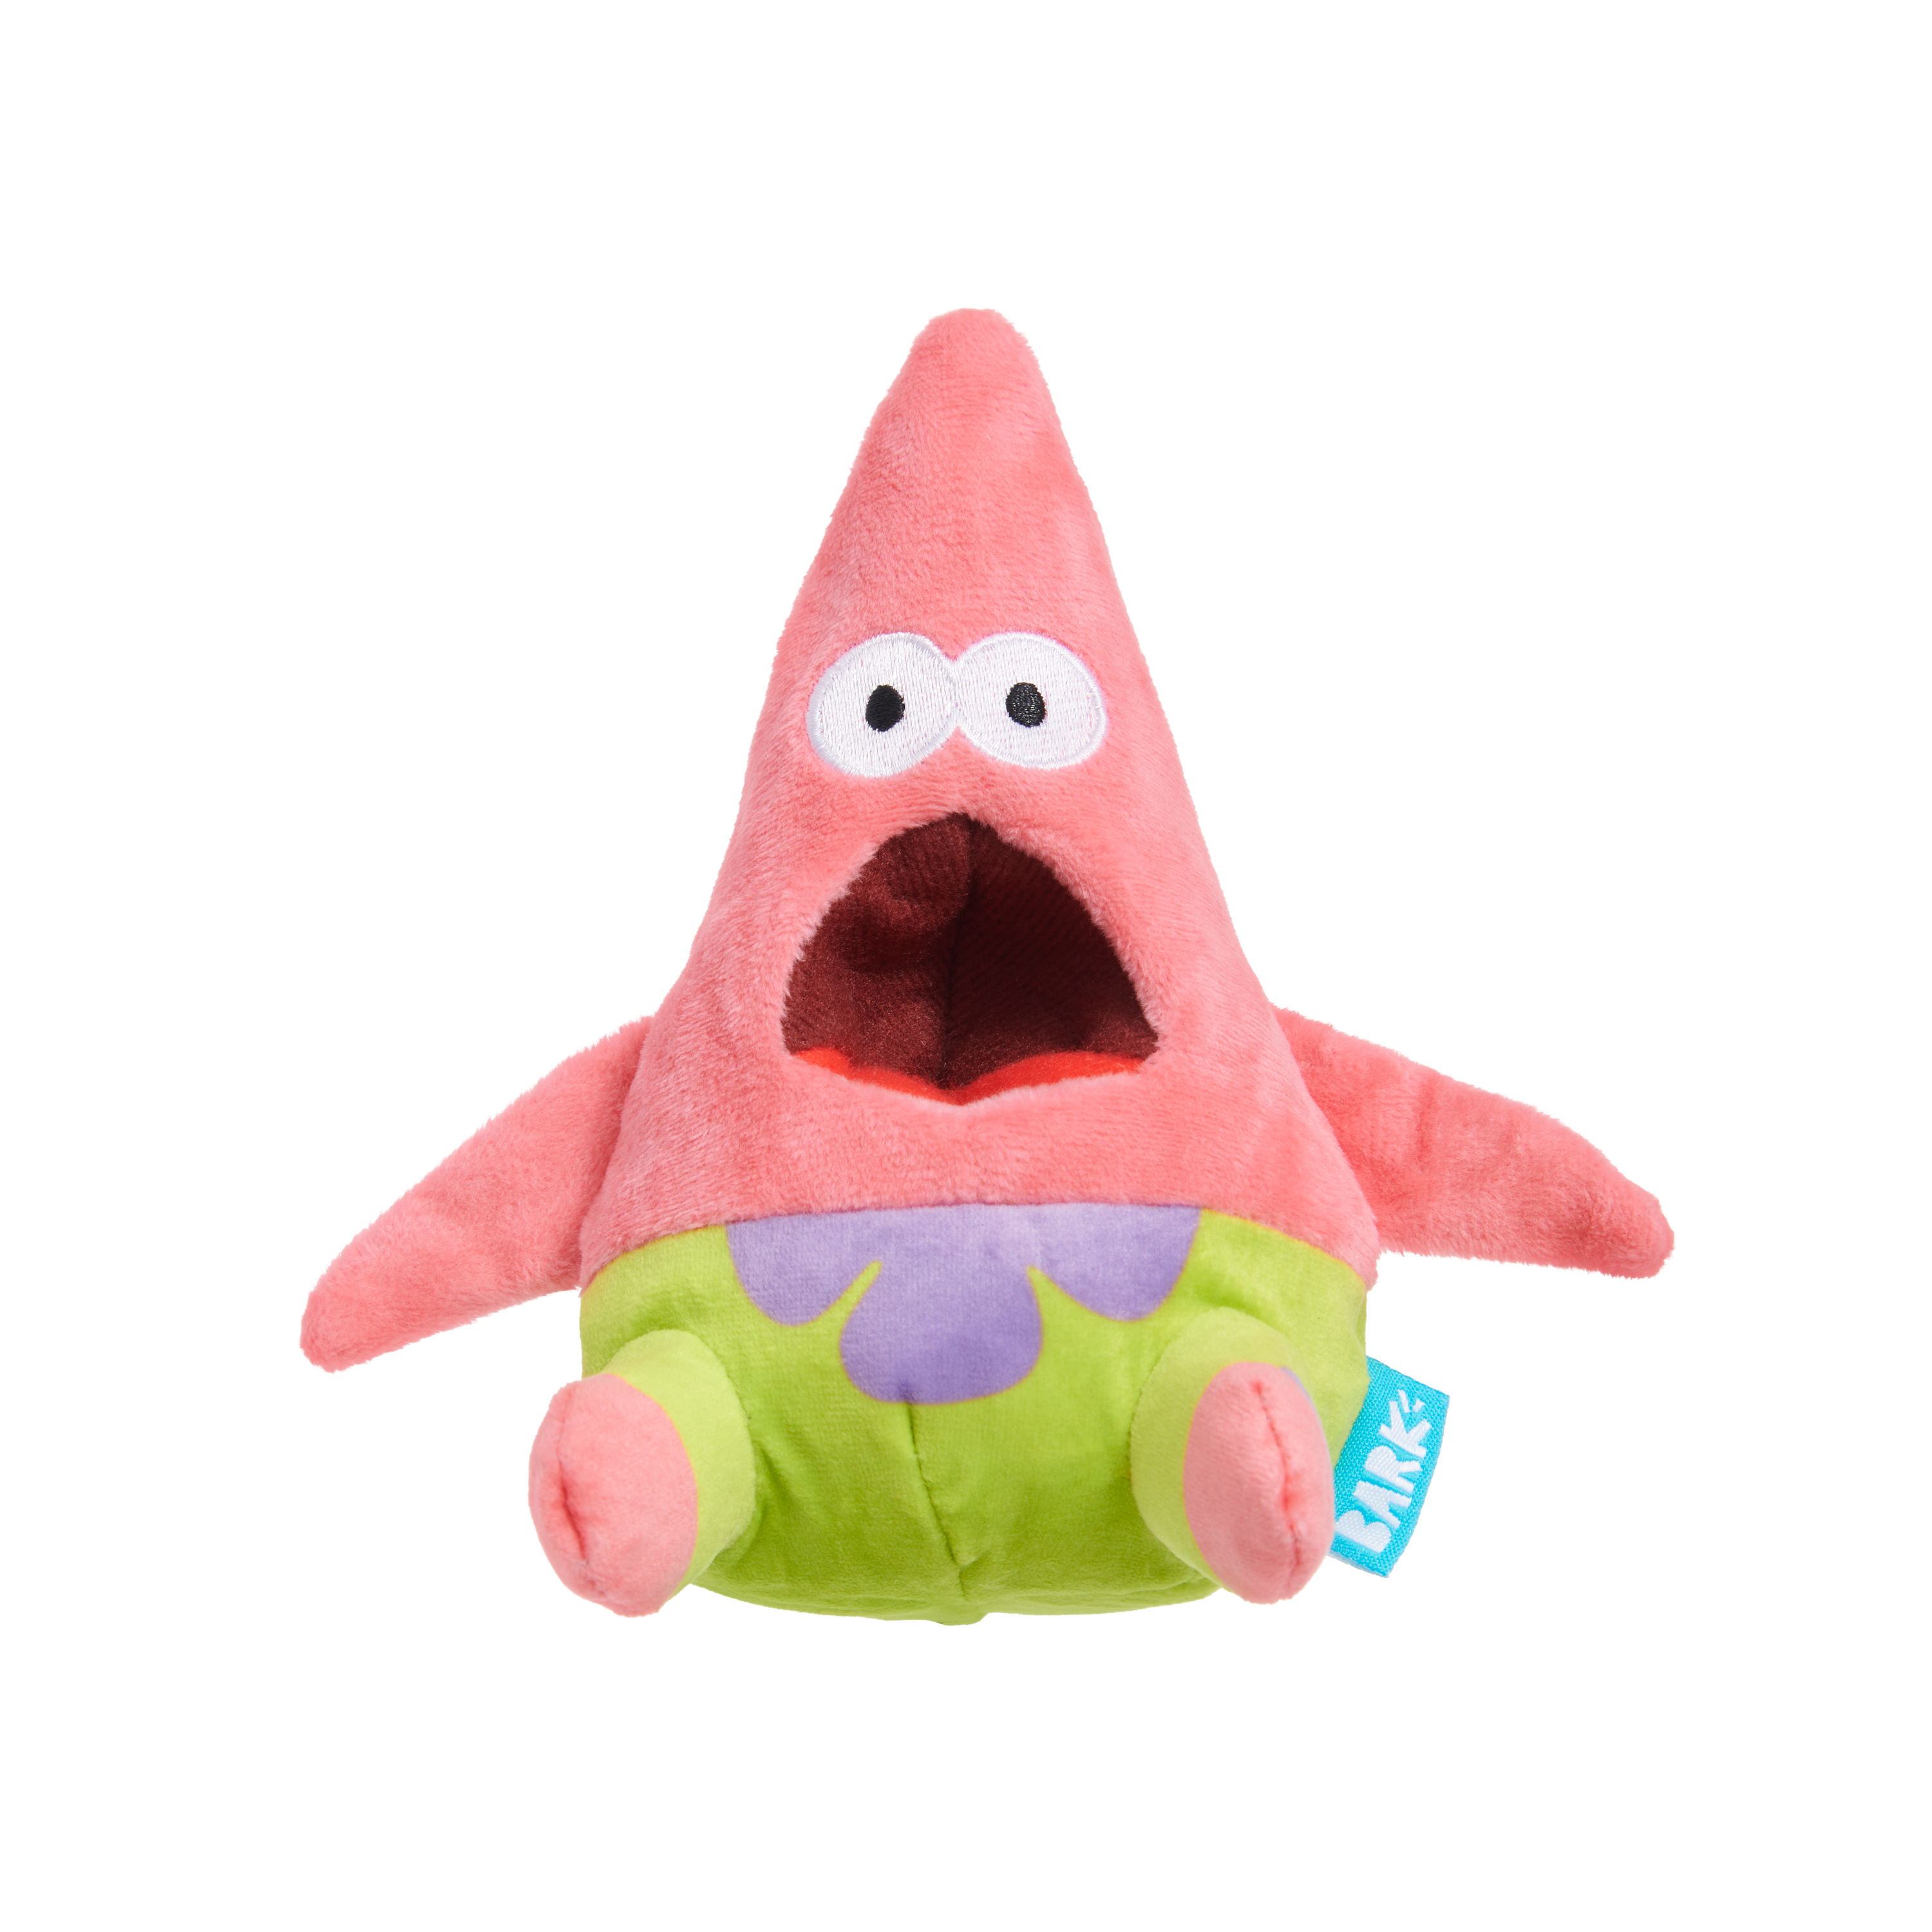 Photograph of BarkBox’s Surprised Patrick product